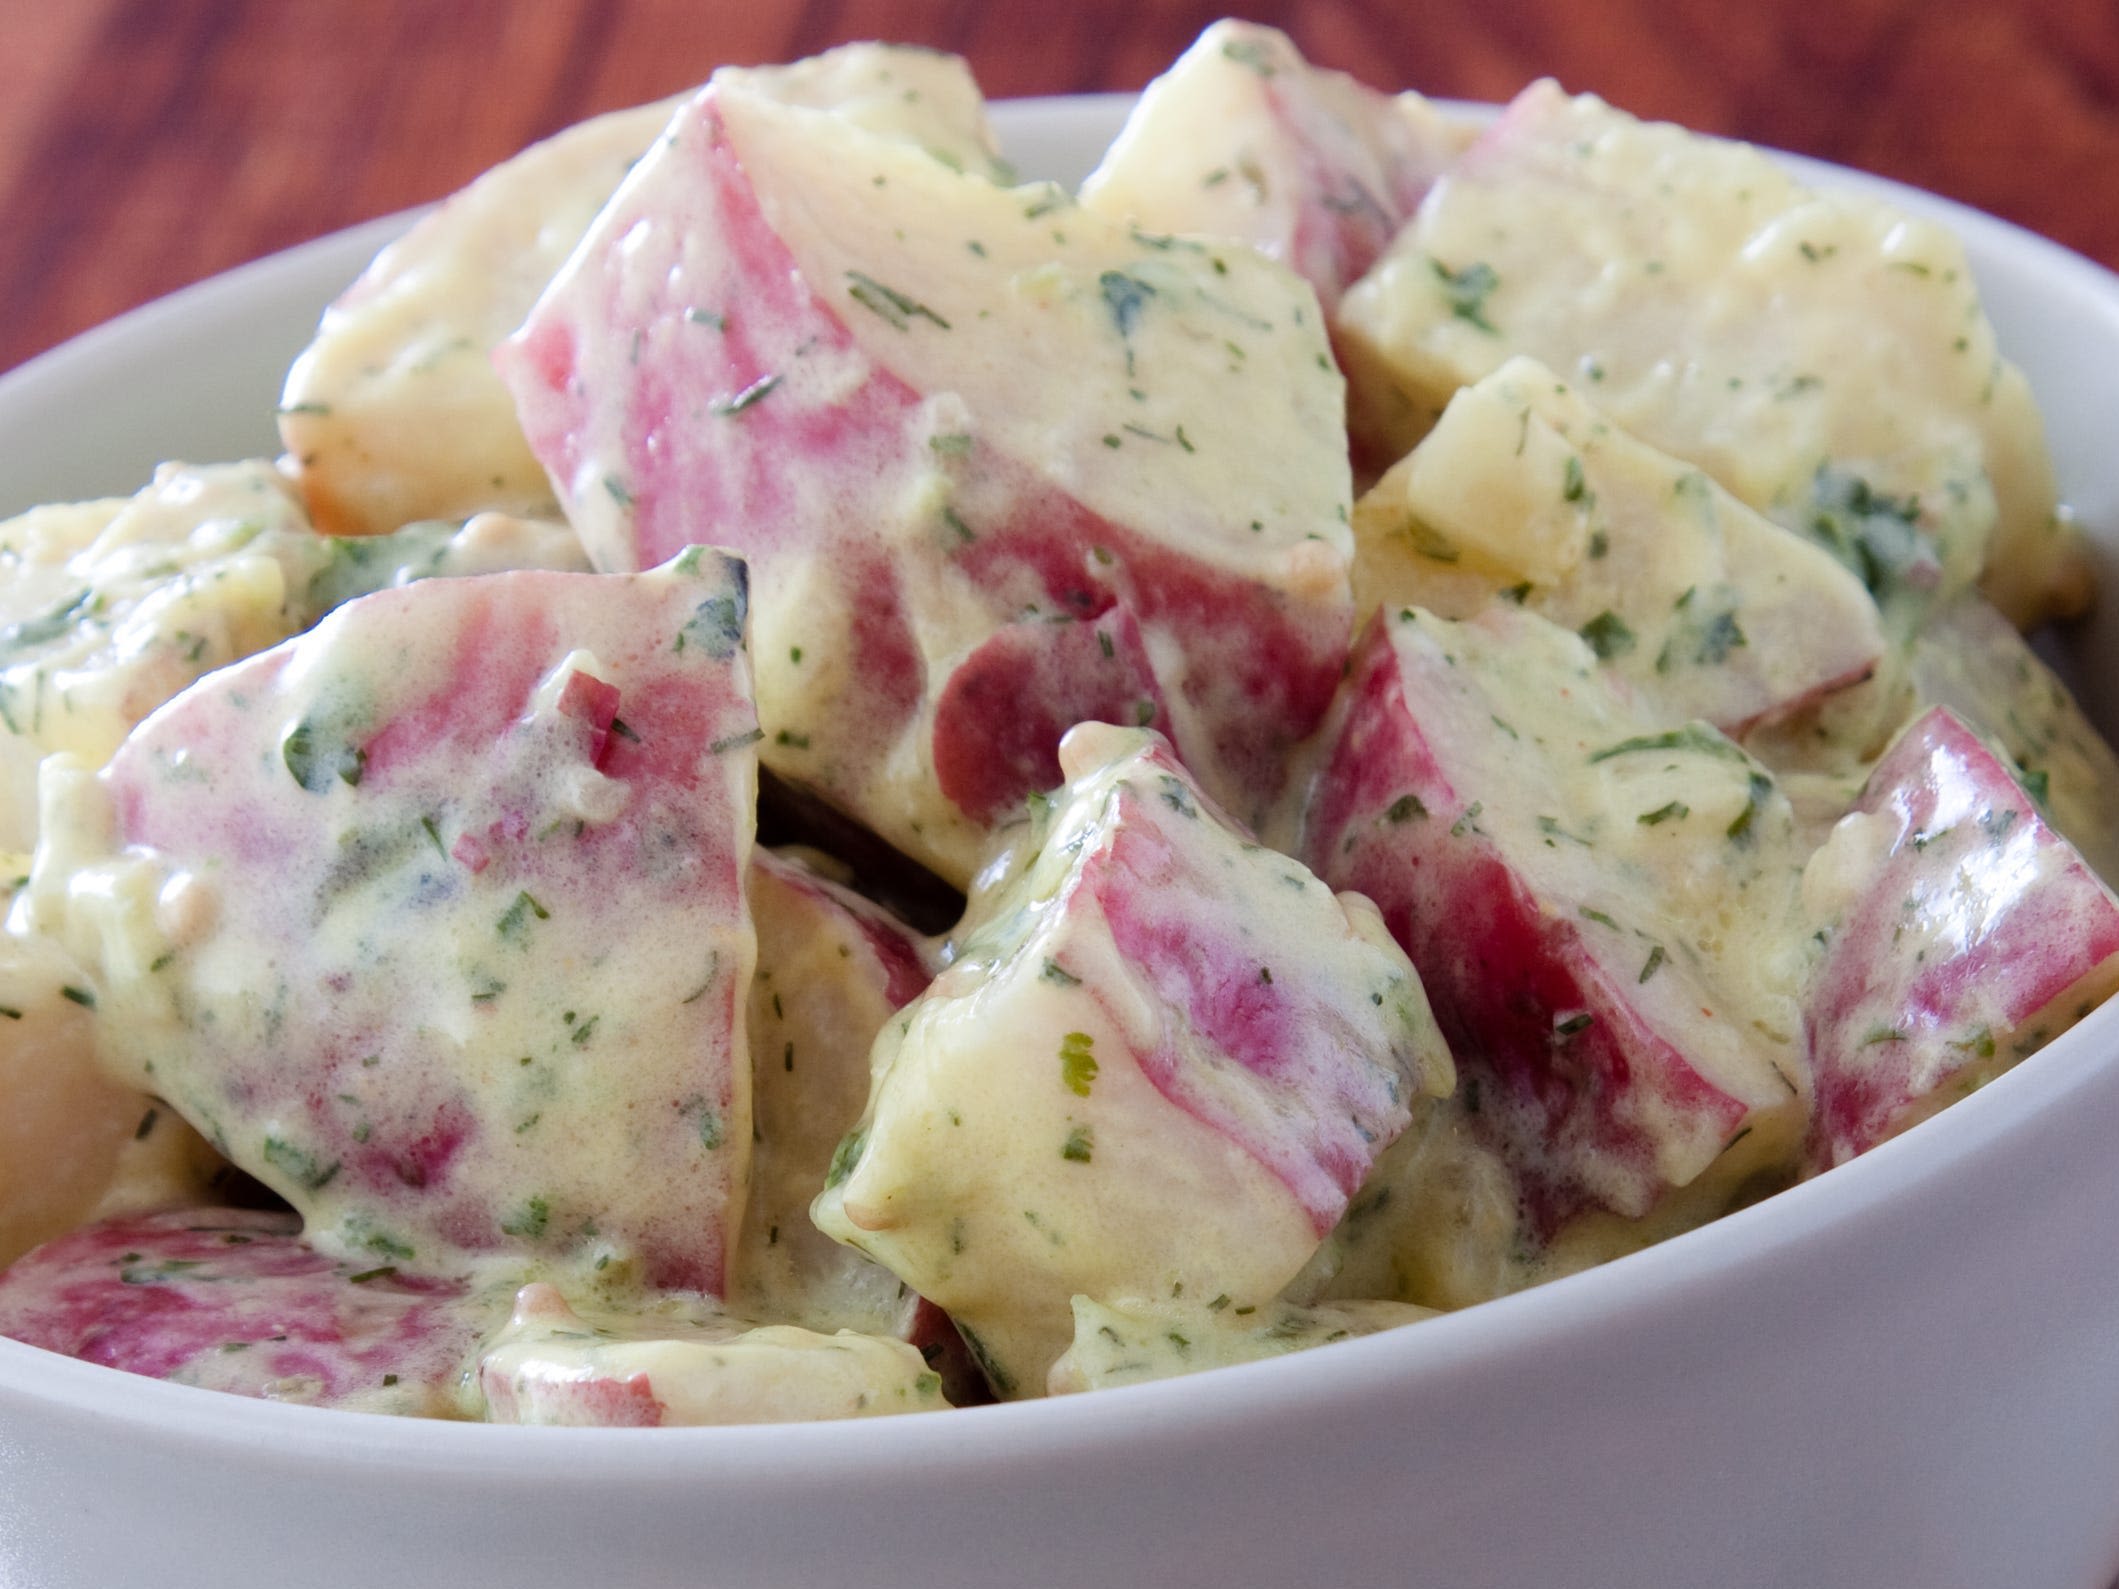 16 easy ways to make your potato salad even better using things you already have in your kitchen